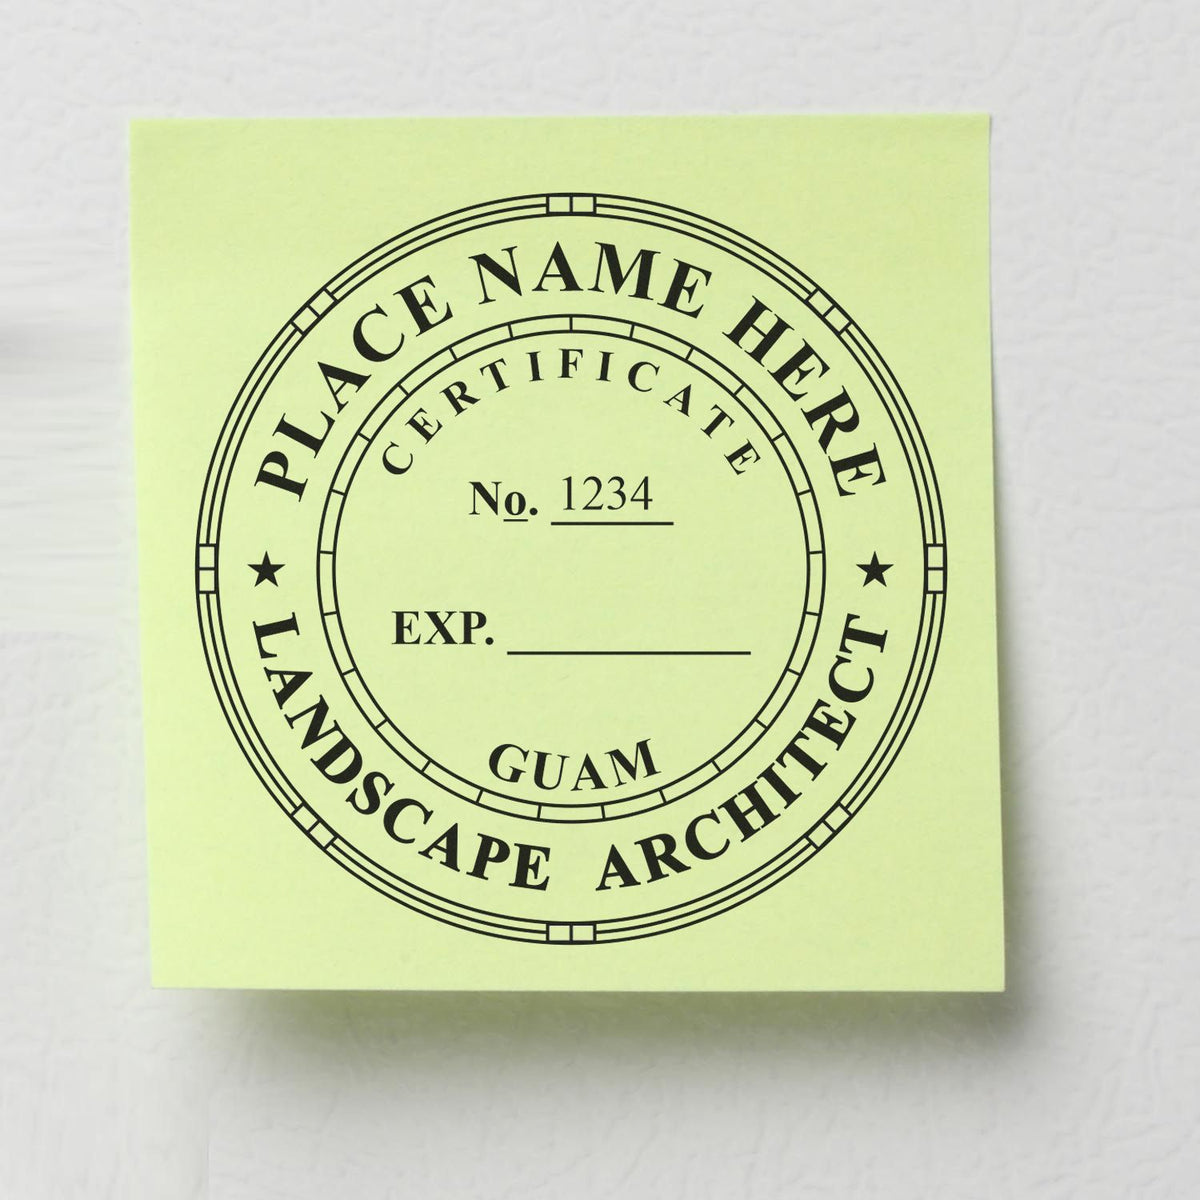 Slim Pre-Inked Guam Landscape Architect Seal Stamp in use photo showing a stamped imprint of the Slim Pre-Inked Guam Landscape Architect Seal Stamp